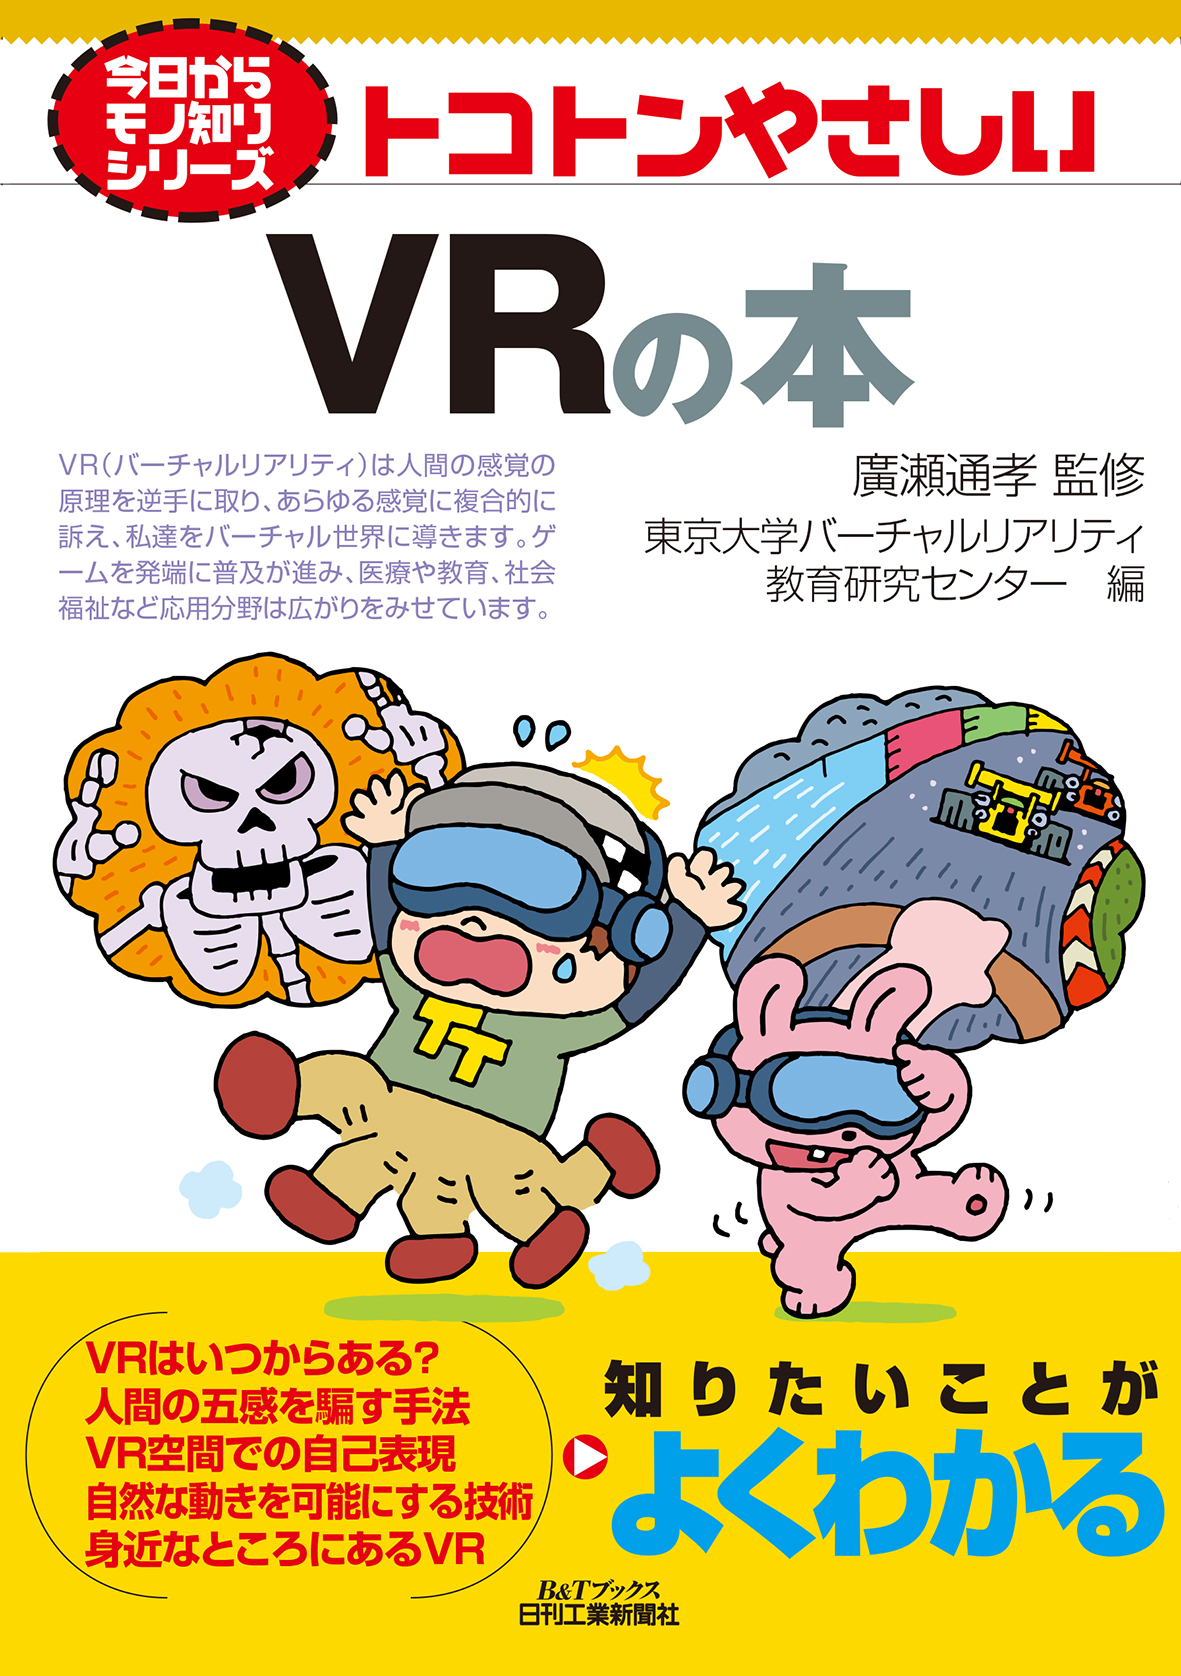 Illustrations of boy and rabbit experiencing VR